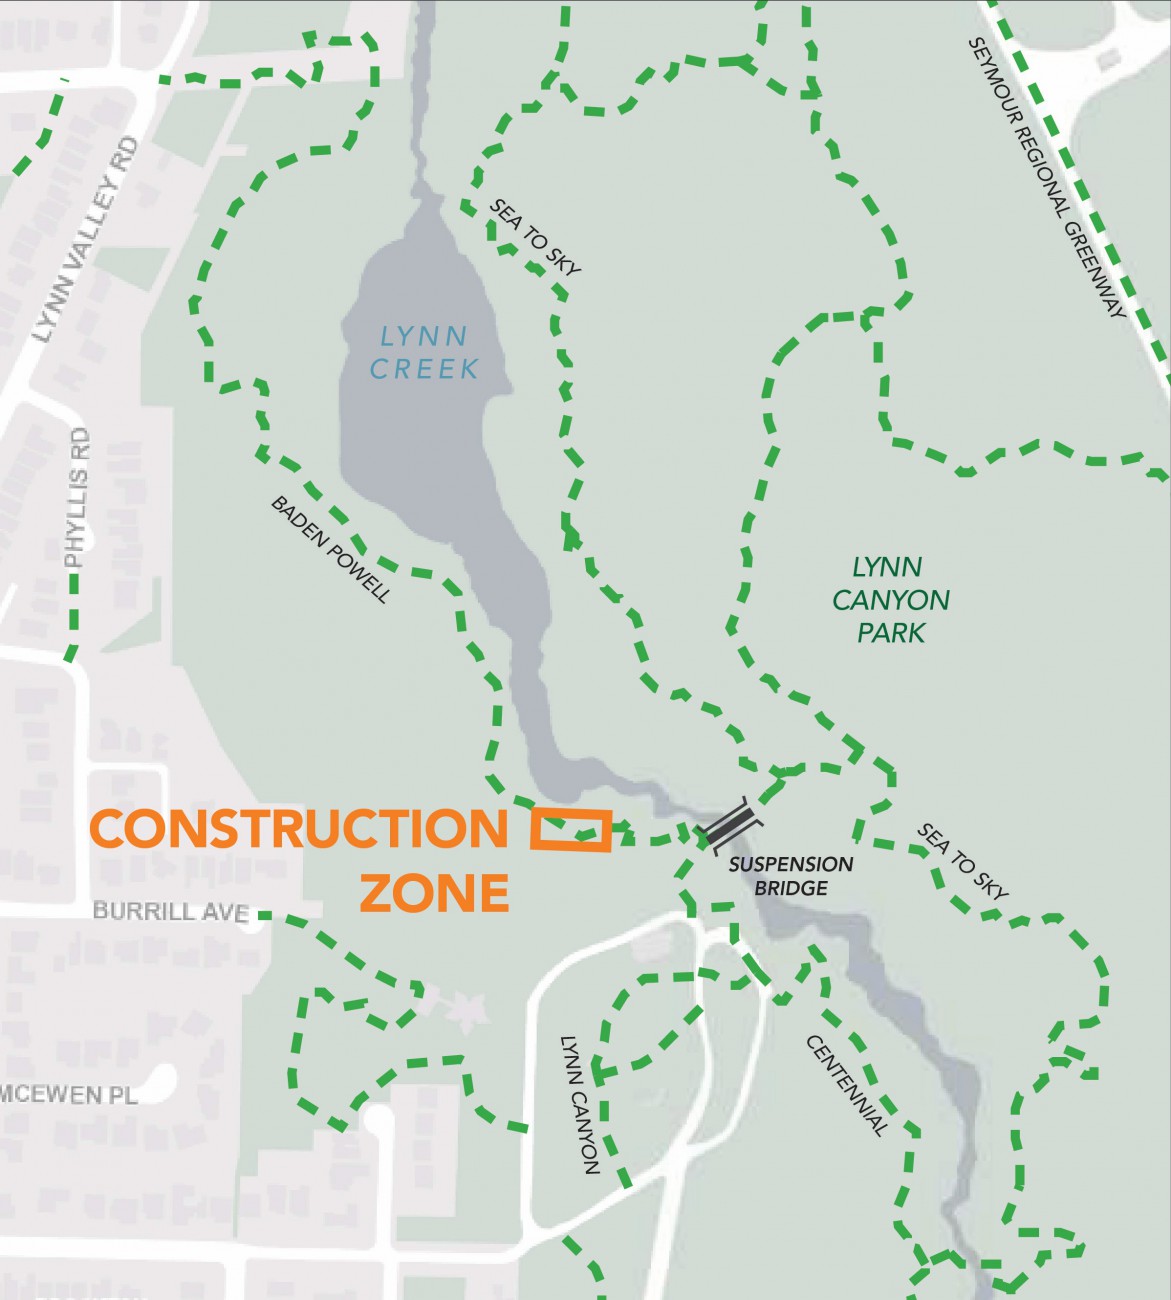 A map of Lynn Canyon Park with construction zone denoted on the Baden Powell trail, near the Suspension Bridge.